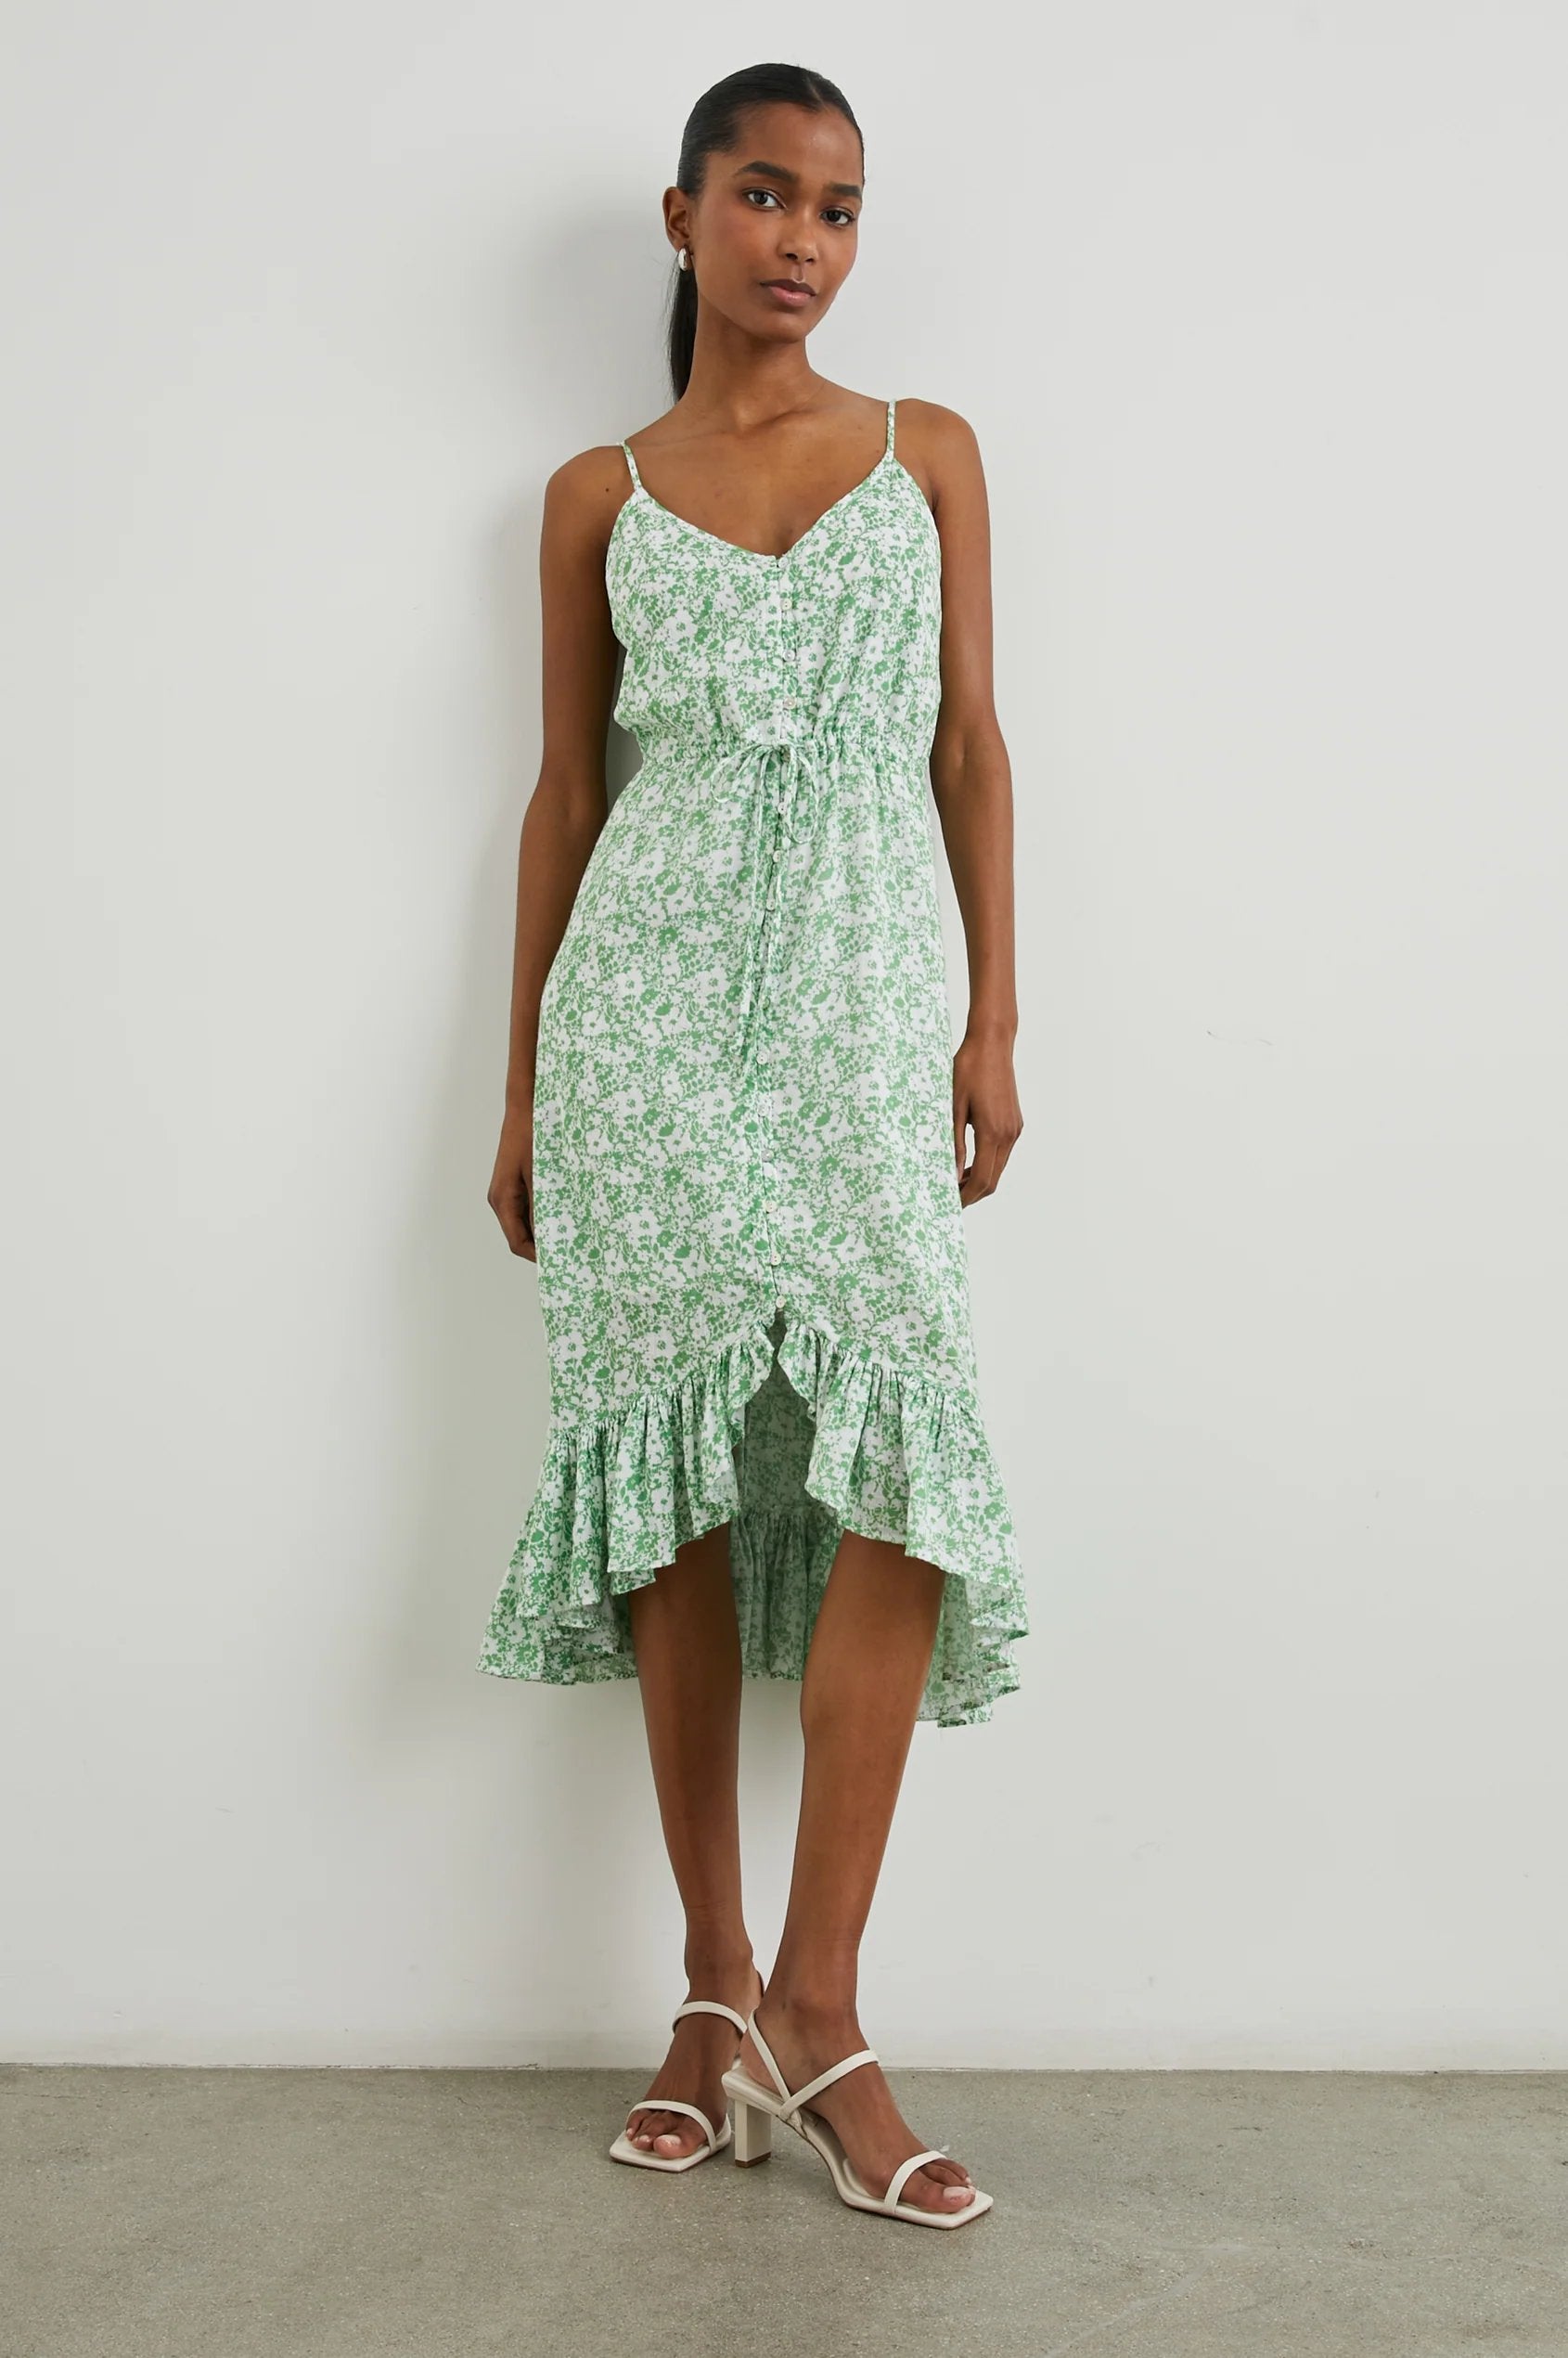 Rails Frida Dress in Green Texture Floral